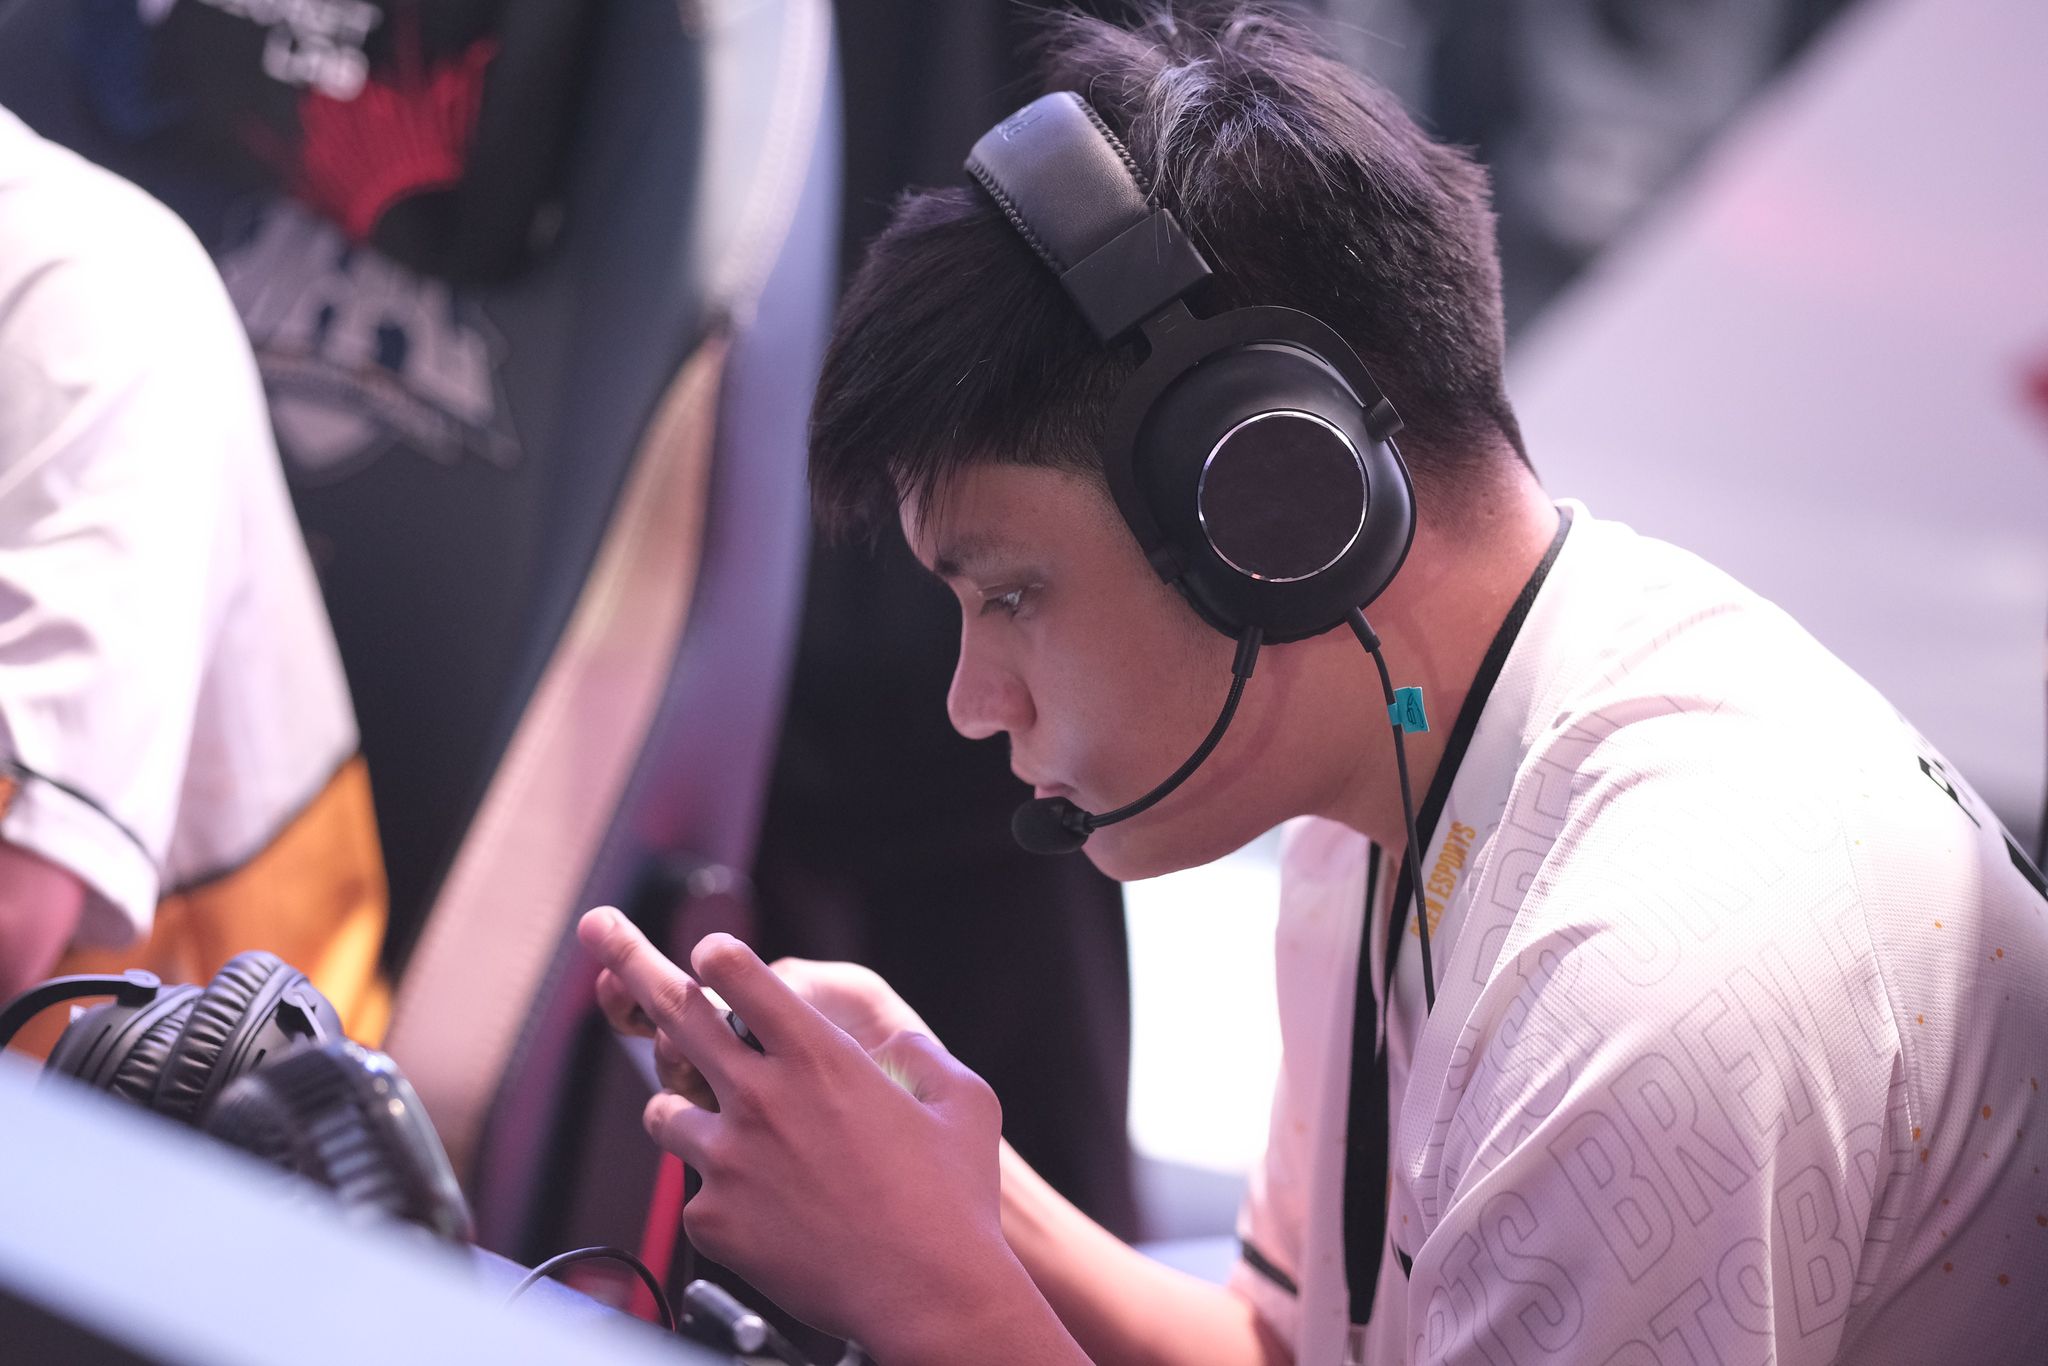 MPL-PH-10-Bren-def-Nexplay-Pheww-2 Pheww uses negative comments on him as constructive criticism ESports Mobile Legends MPL-PH News  - philippine sports news